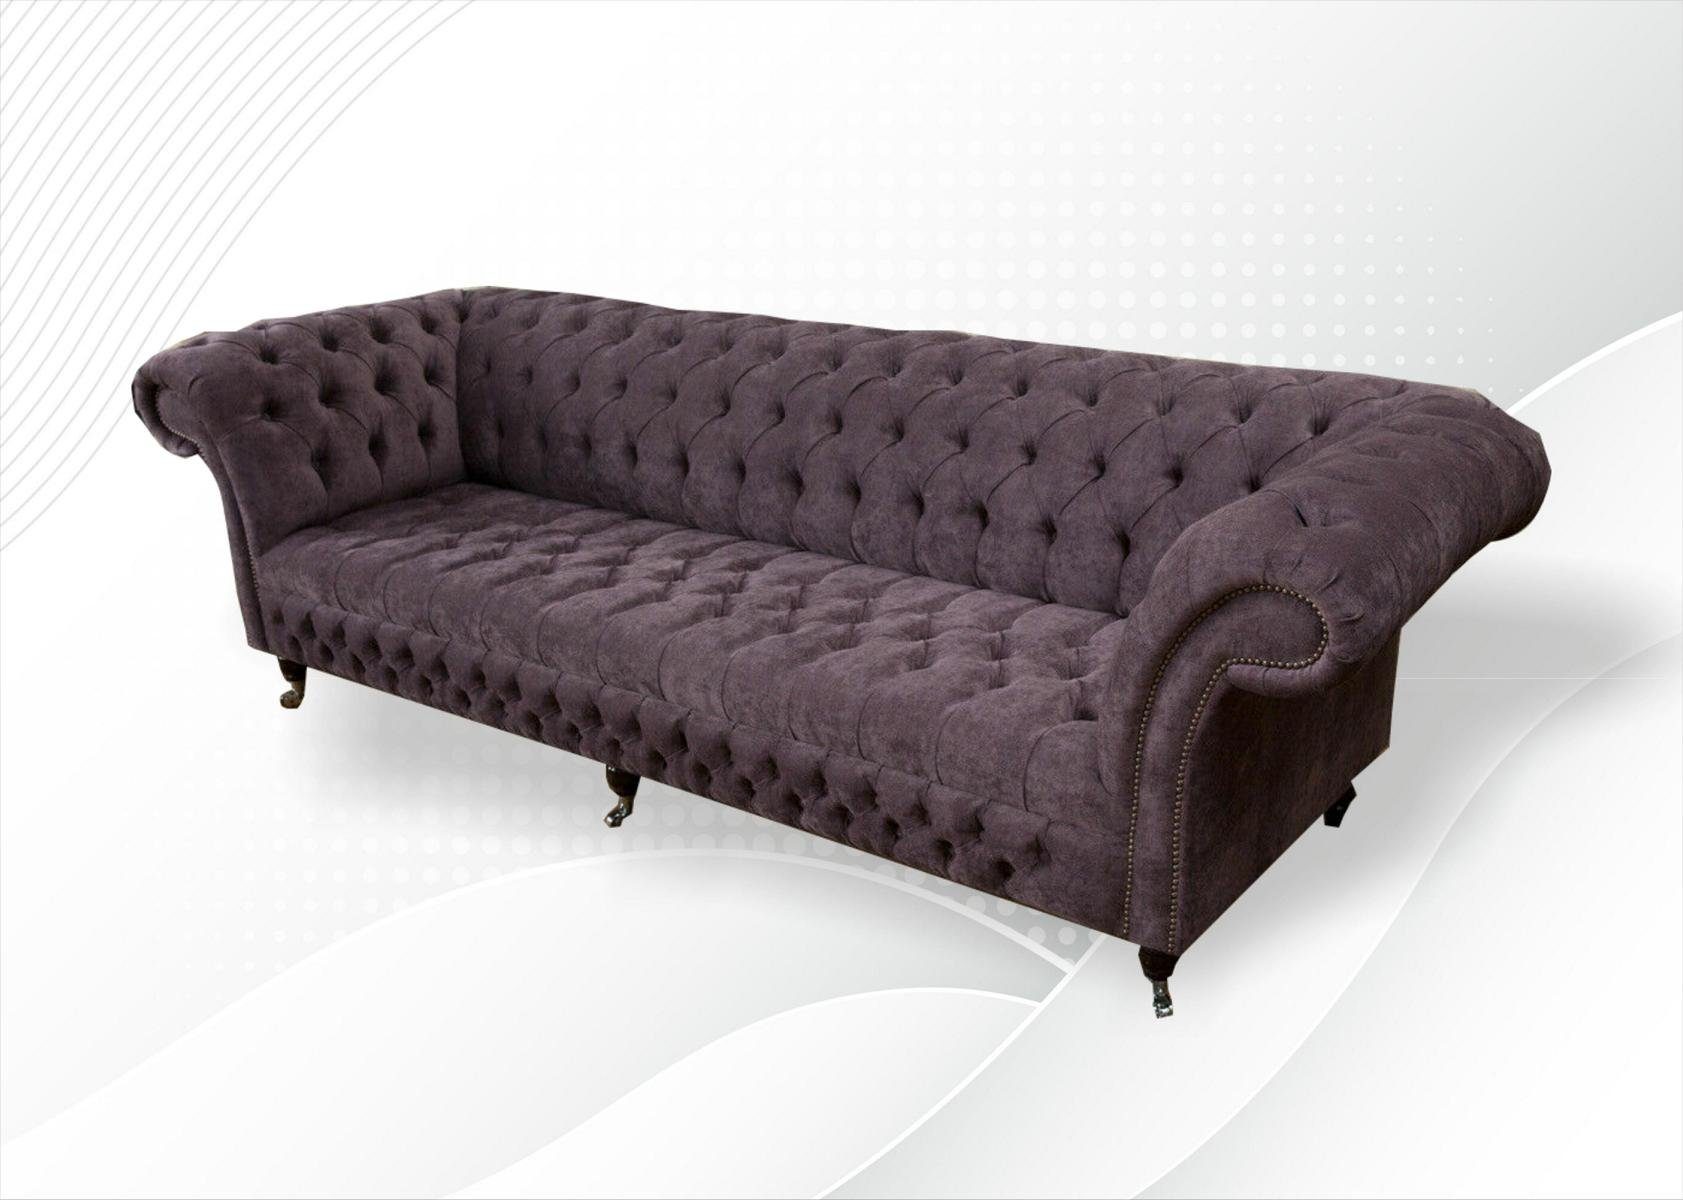 JVmoebel Sofa xxl Sofas Couch Sofa Big Chesterfield 4 Europe Polster Leder, Made 265cm in Sitzer